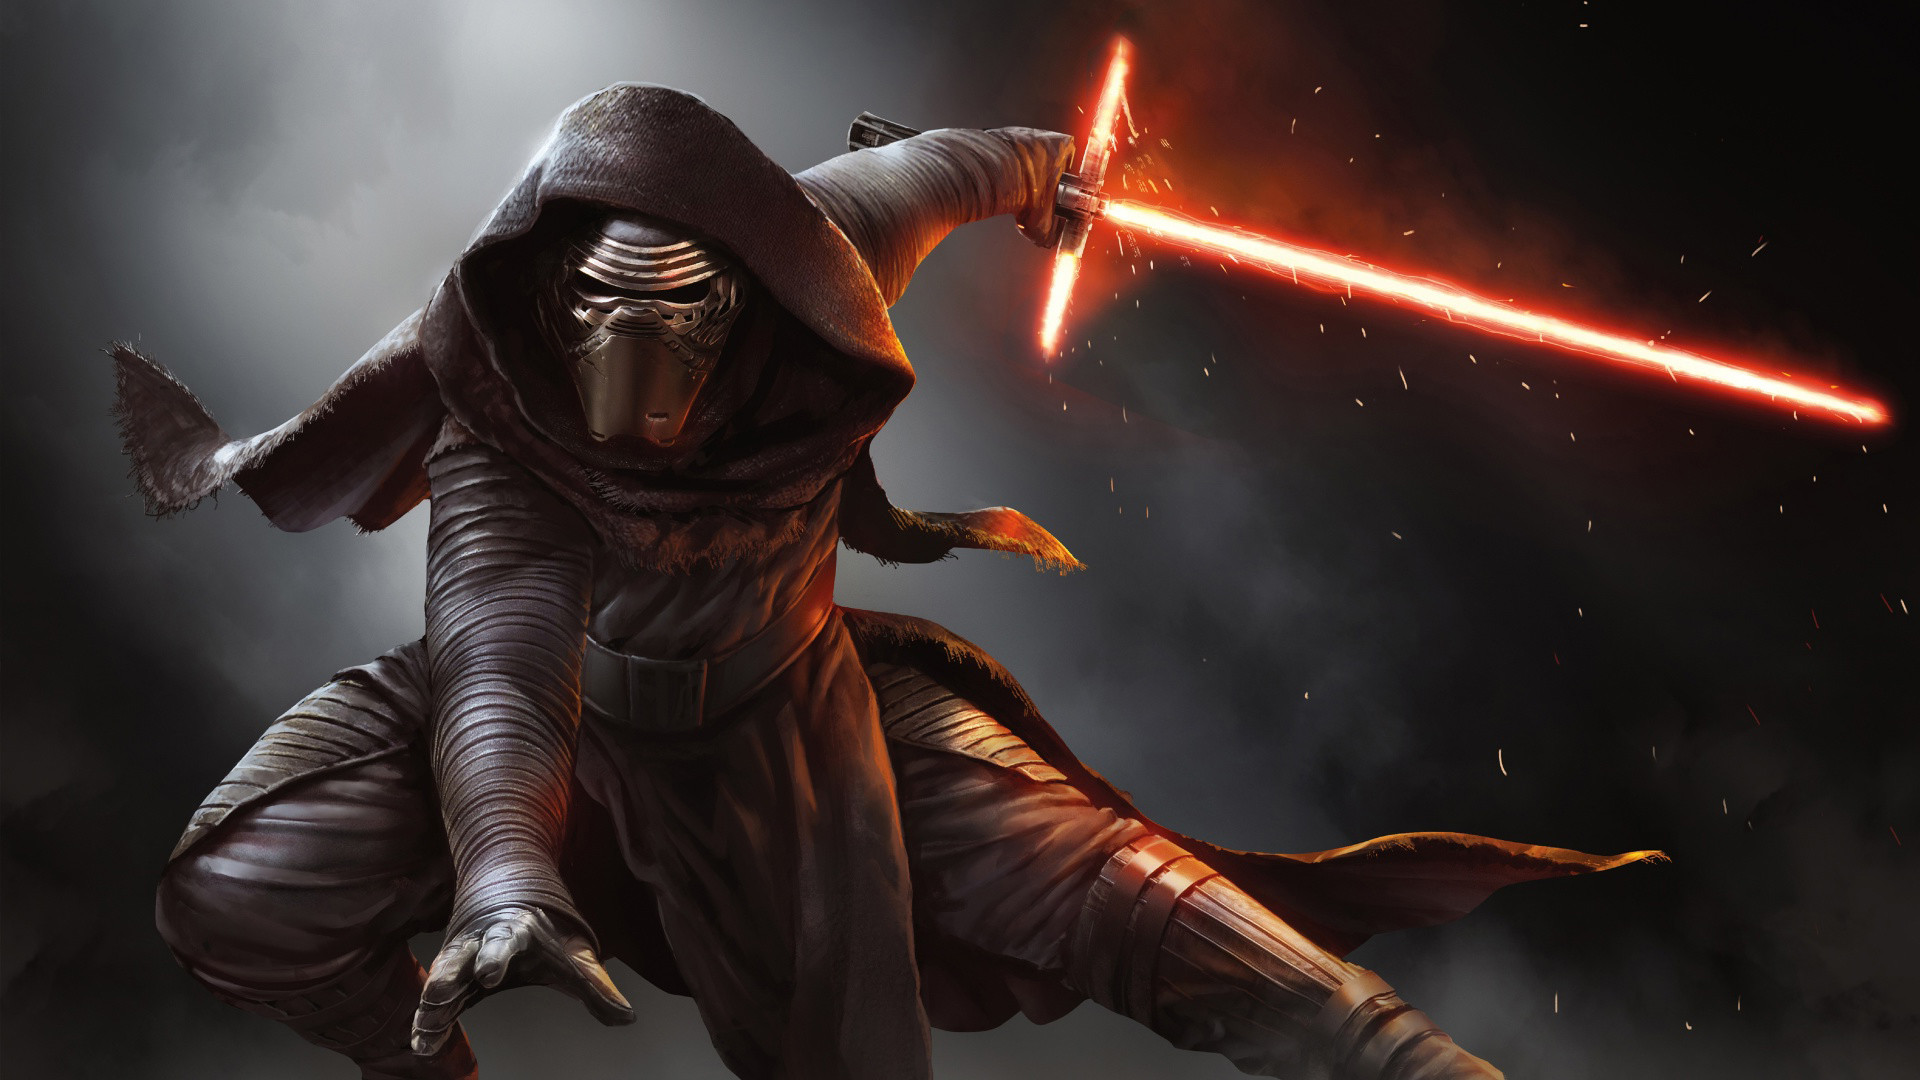 KYLO REN WALLPAPERS FREE Wallpapers & Background images .